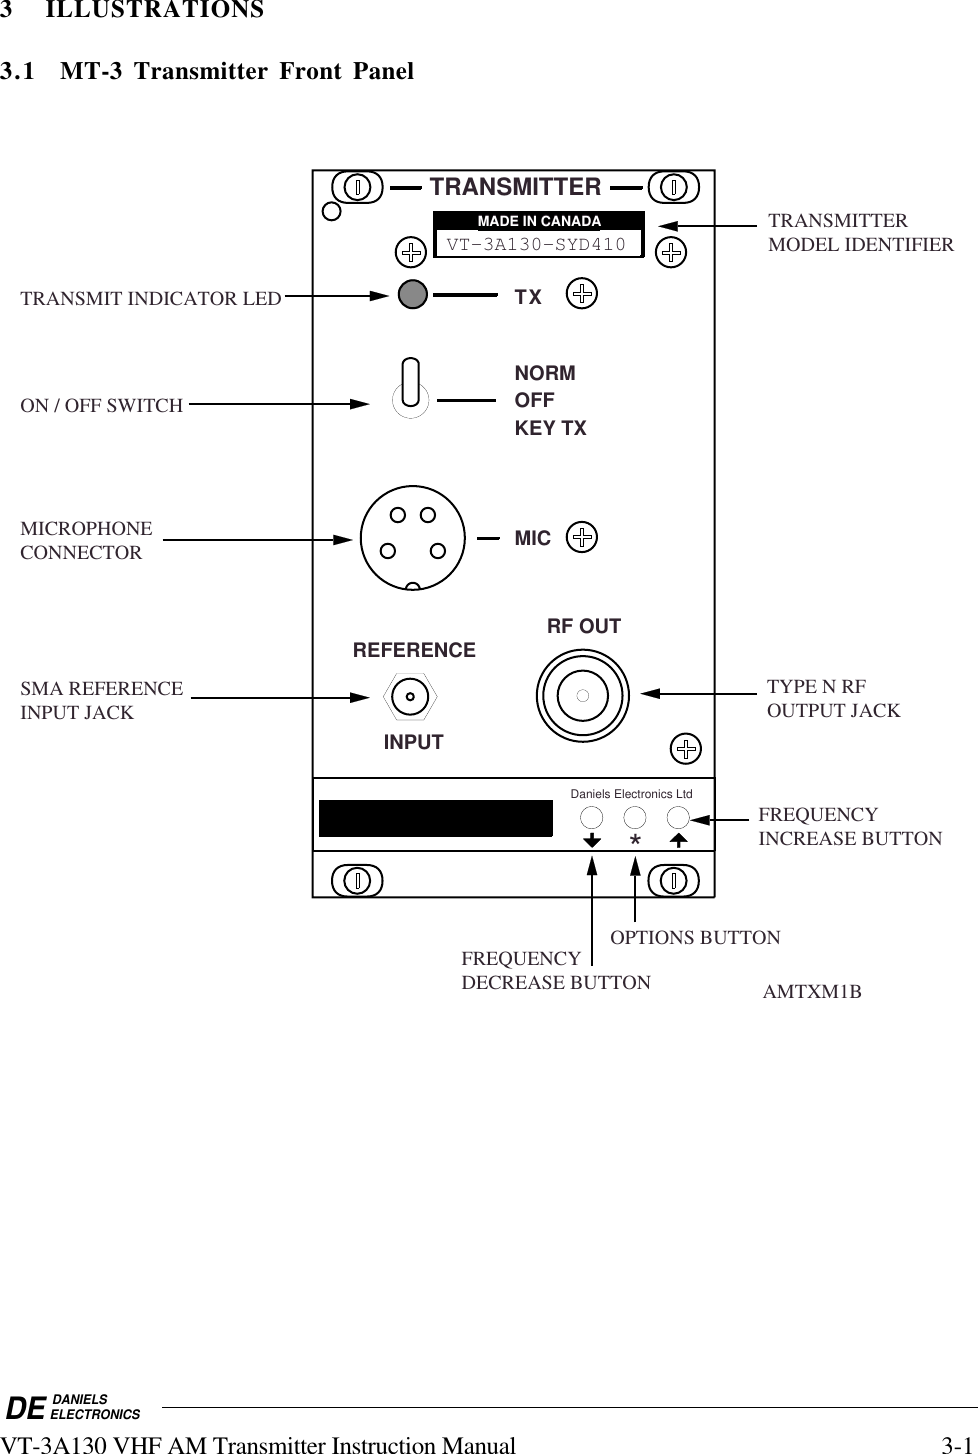 DE DANIELSELECTRONICSVT-3A130 VHF AM Transmitter Instruction Manual 3-13 ILLUSTRATIONS3.1 MT-3 Transmitter Front PanelMADE IN CANADAVT-3A130-SYD410MADE IN CANADAMADE IN CANADAAMTXM1BON / OFF SWITCHTYPE N RF OUTPUT JACKSMA REFERENCEINPUT JACKTRANSMIT INDICATOR LEDTRANSMITTER MODEL IDENTIFIERMICROPHONECONNECTORTRANSMITTERTXREFERENCEINPUTOFFNORMKEY TXMICRF OUTFREQUENCYDECREASE BUTTONFREQUENCY INCREASE BUTTONOPTIONS BUTTON*Daniels Electronics Ltd